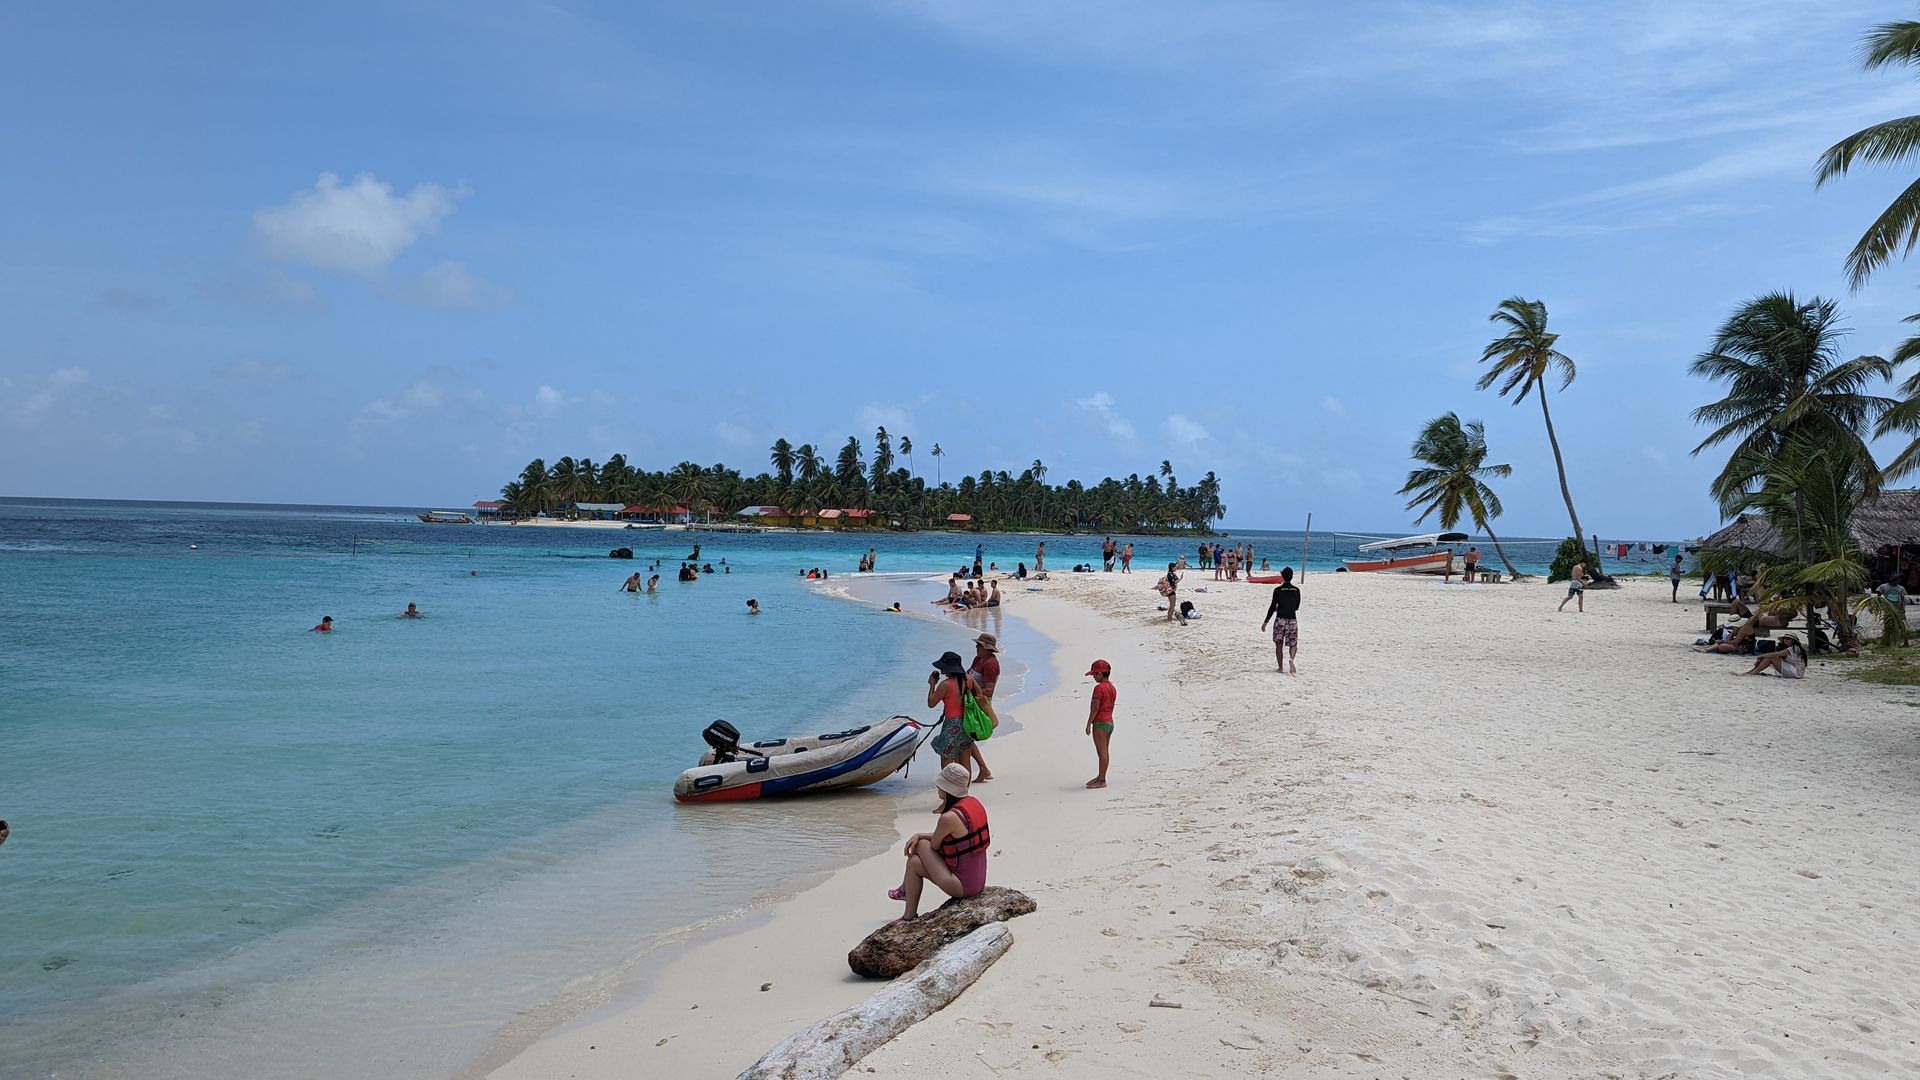 a group of people are on a beach and in the water on perro chico island